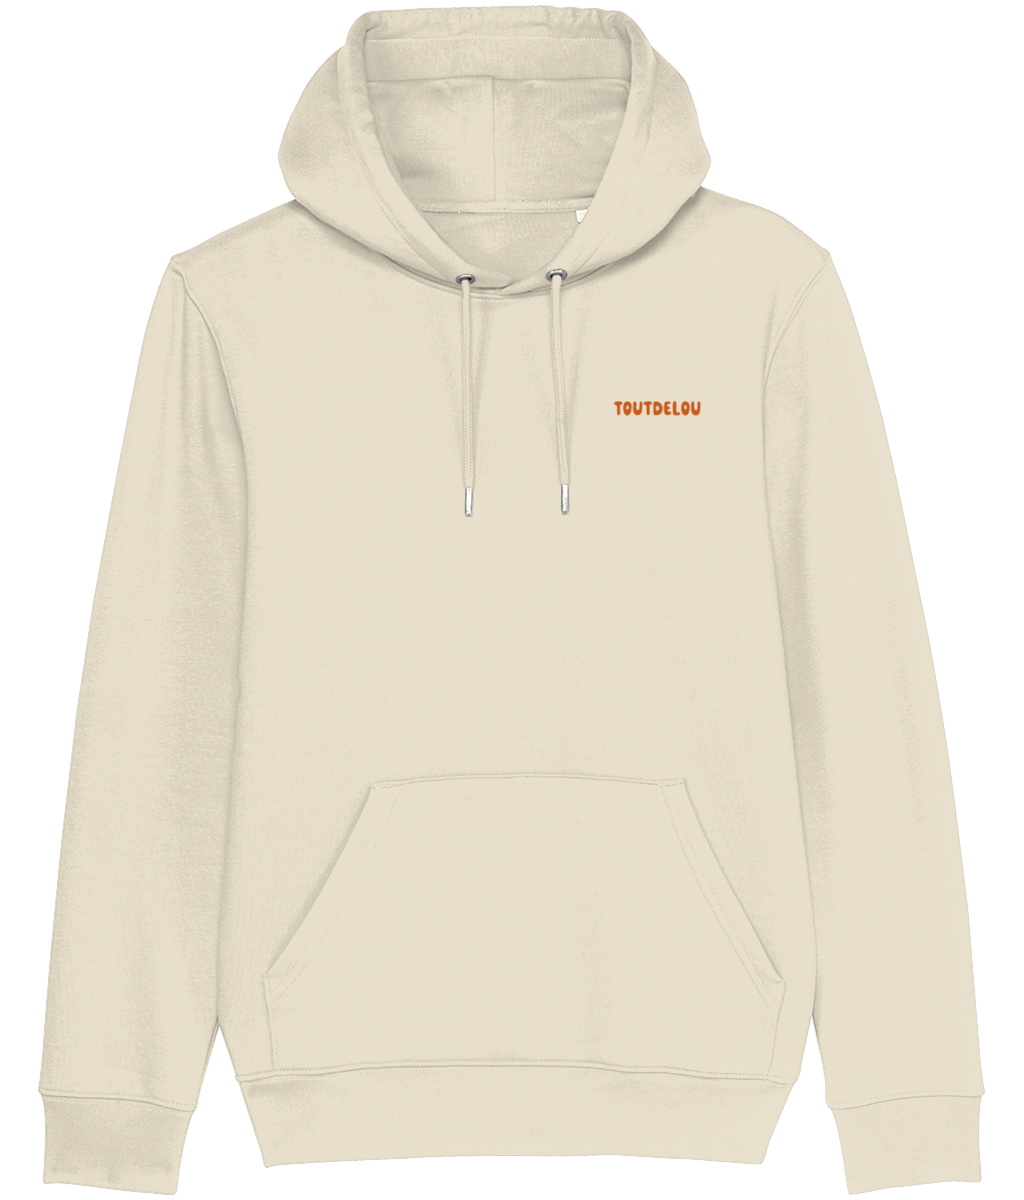 Hoodie - pet all dogs - orange - print on front and back